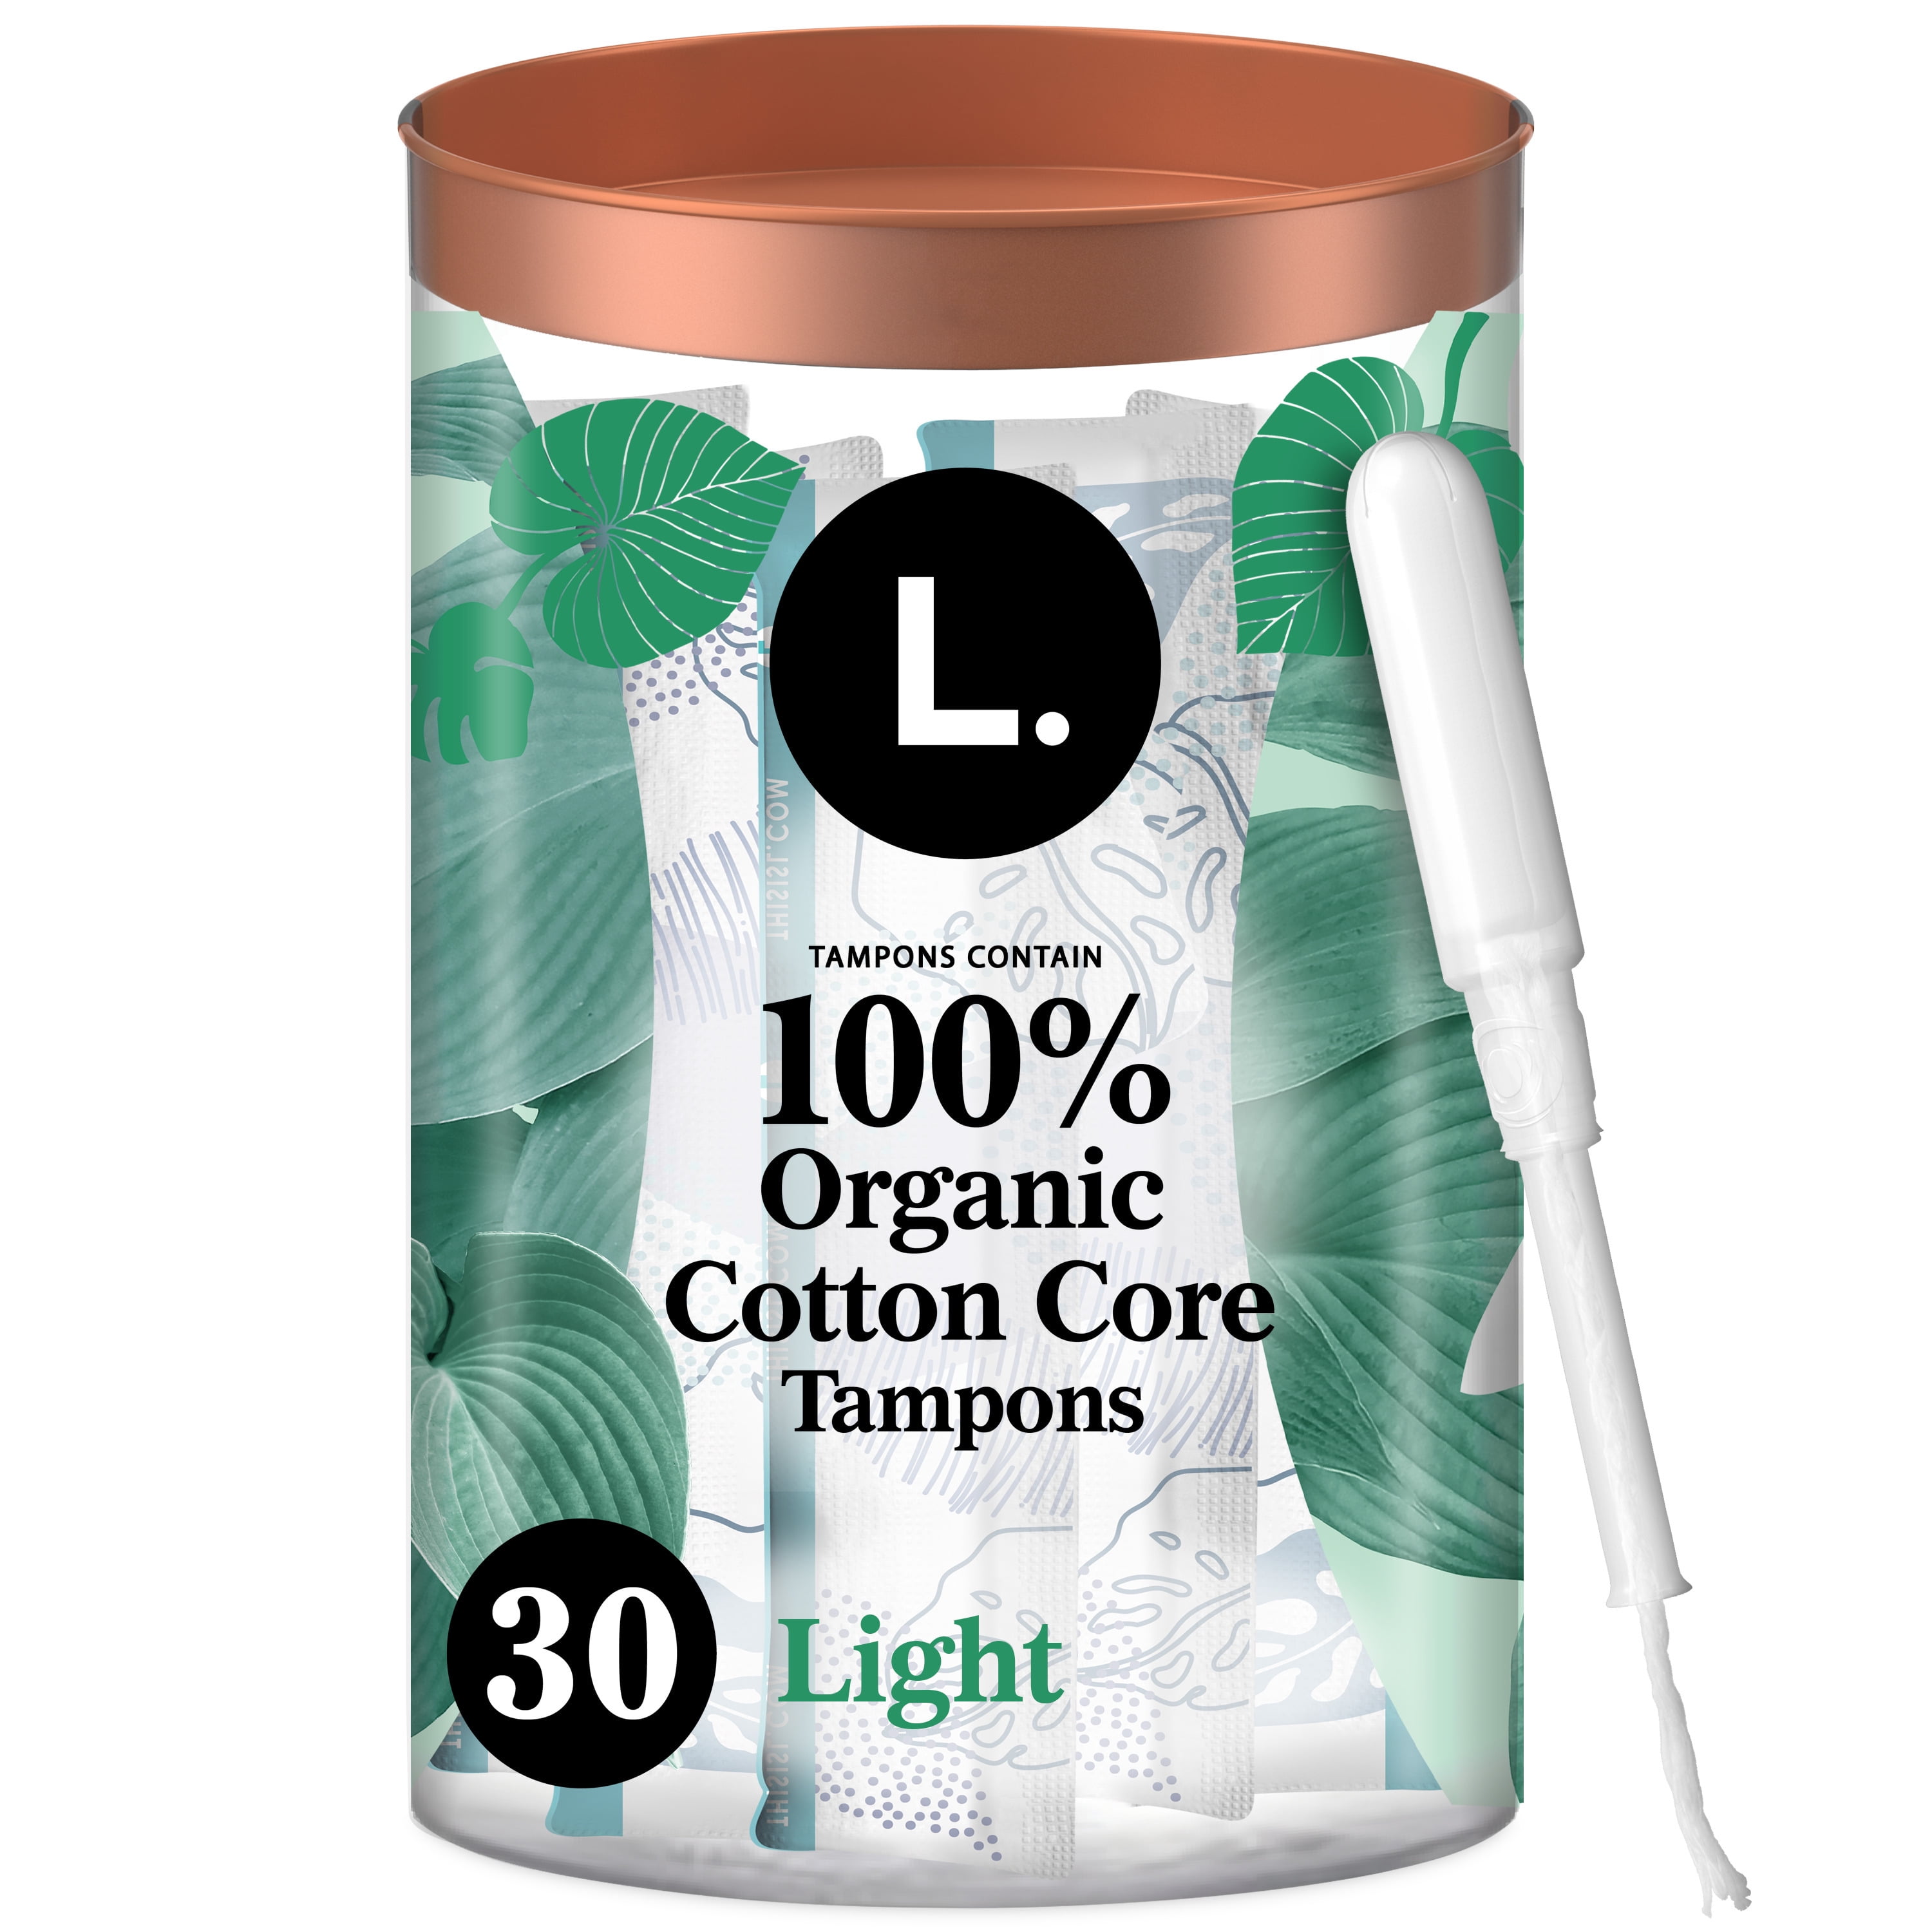 L. Organic Cotton Tampons - Light Absorbency, 30 Ct 